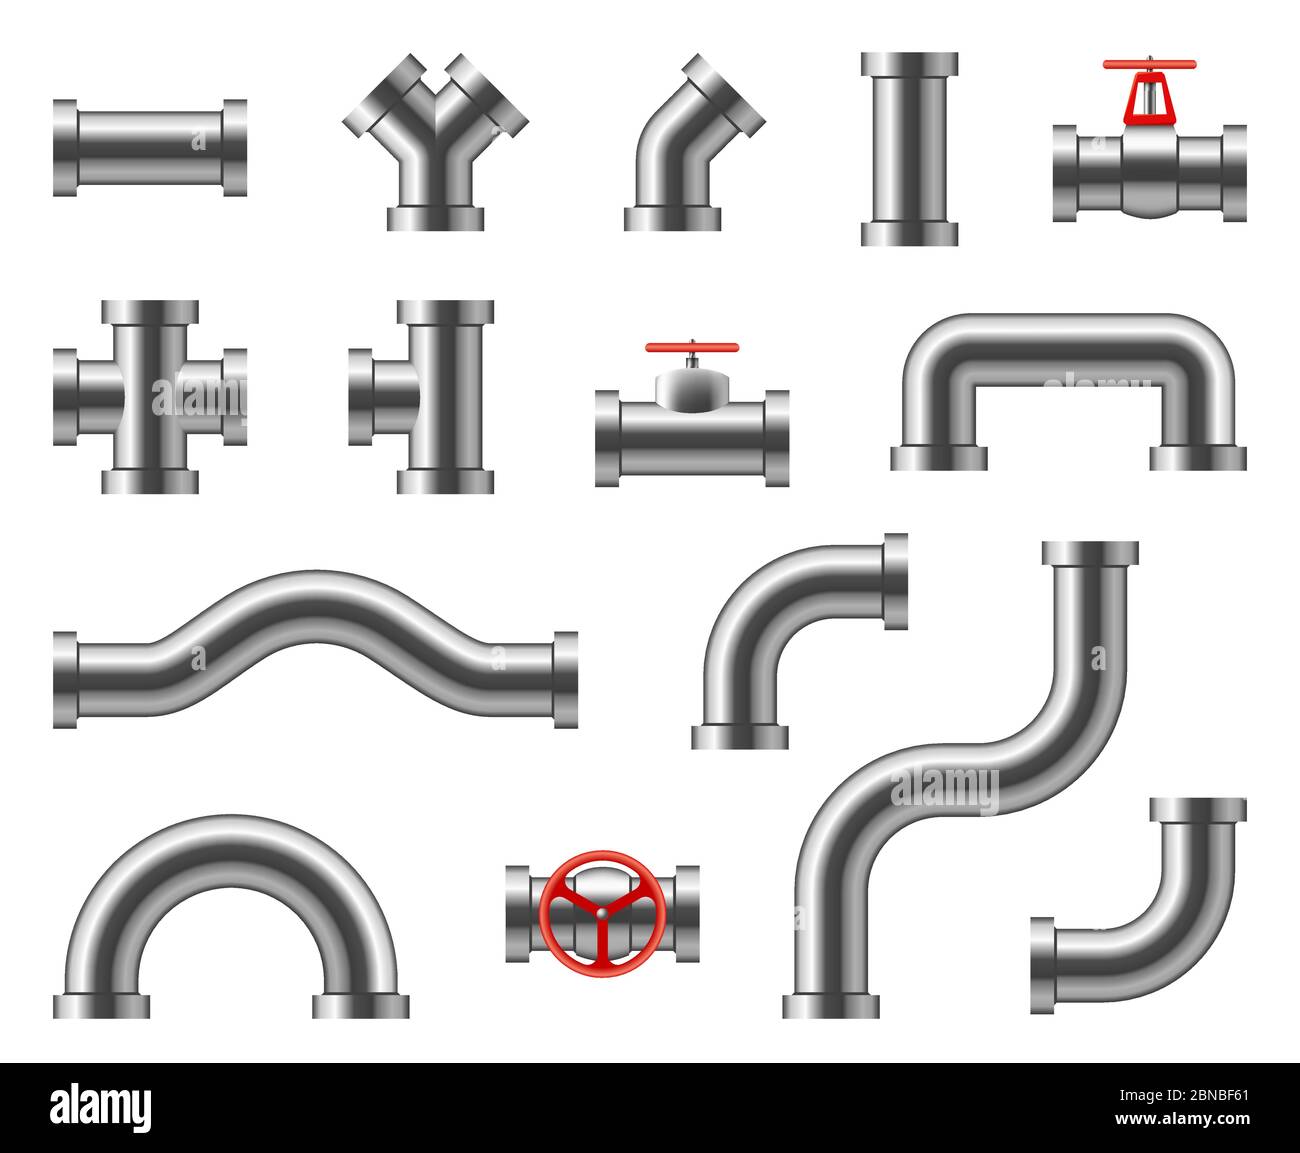 Steel pipes. Metal pipeline connectors, fittings, valves, industrial plumbing for water and gas vector set isolated. Illustration of pipeline and pipe part for water or oil Stock Vector